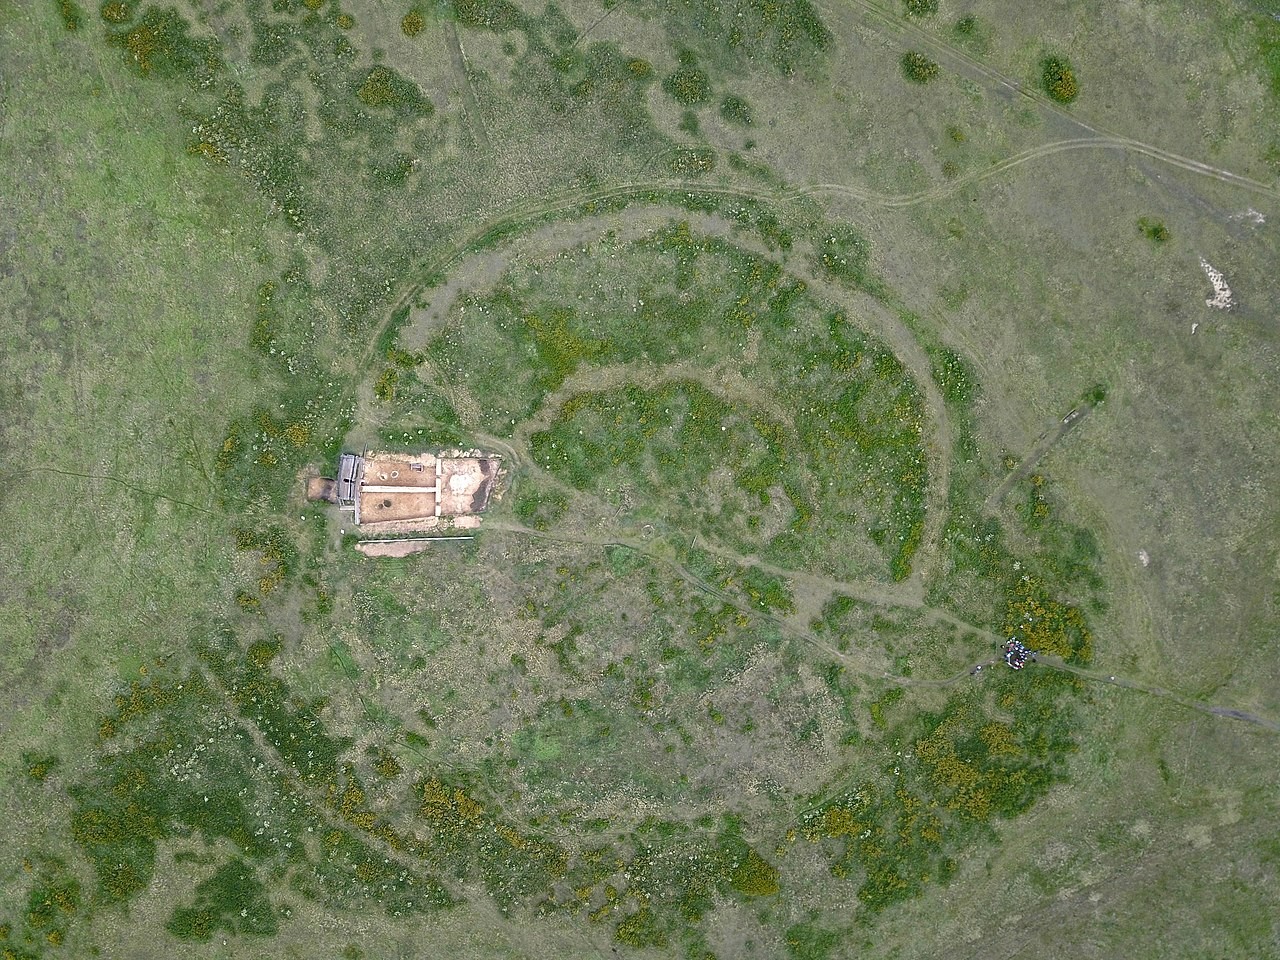 The Arkaim site as seen from above